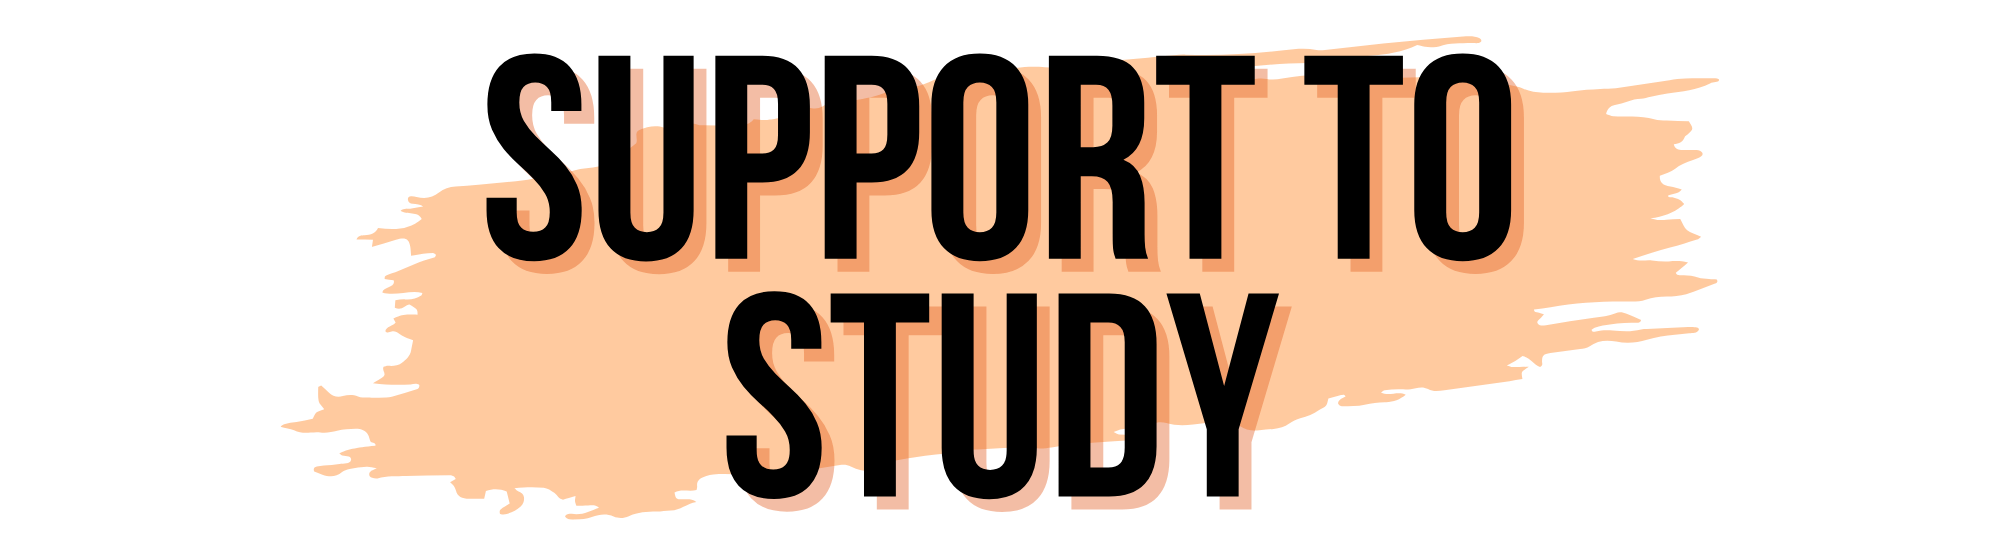 Support to Study